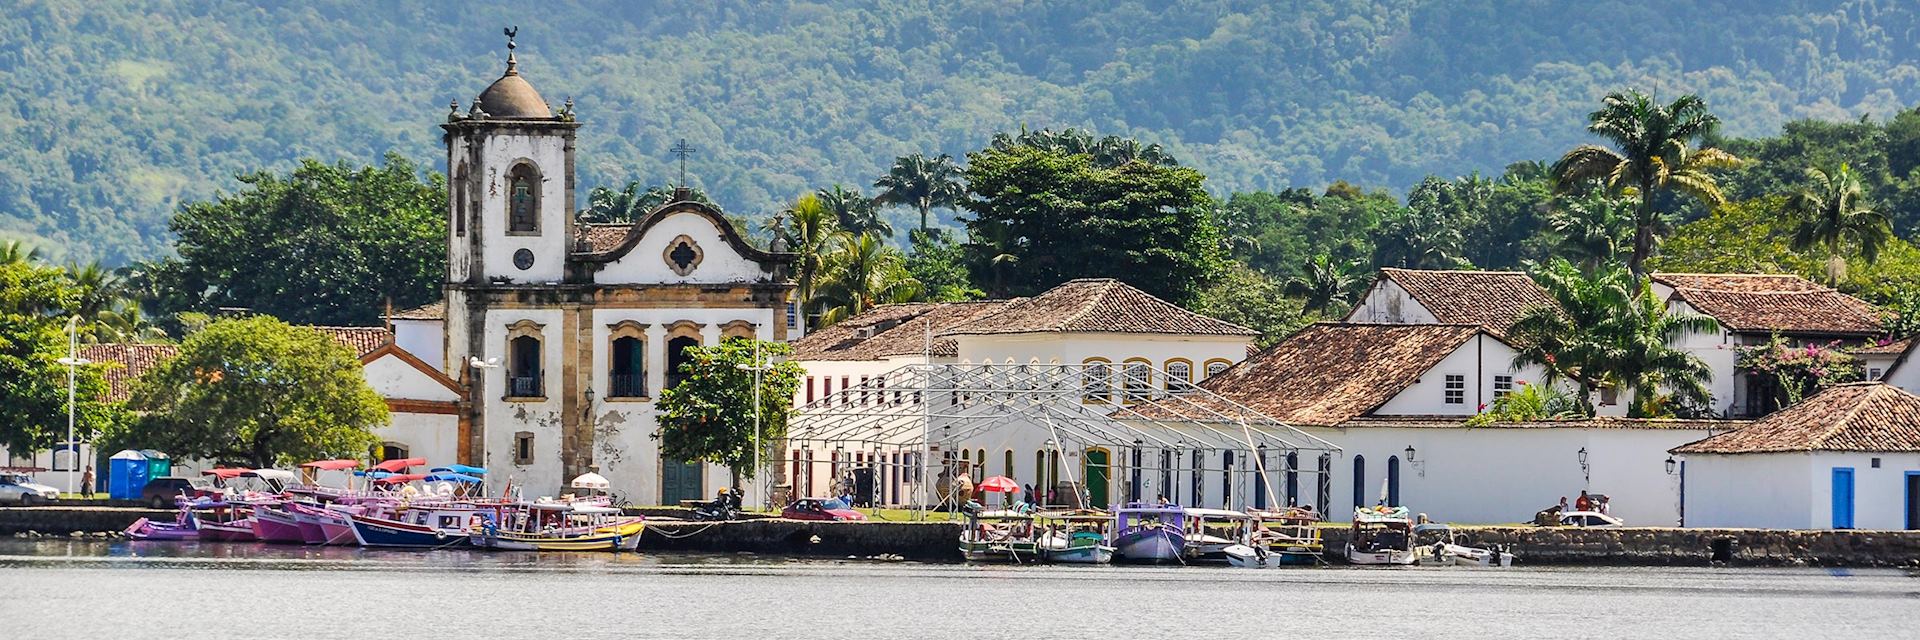 The town of Paraty along the Green Coast